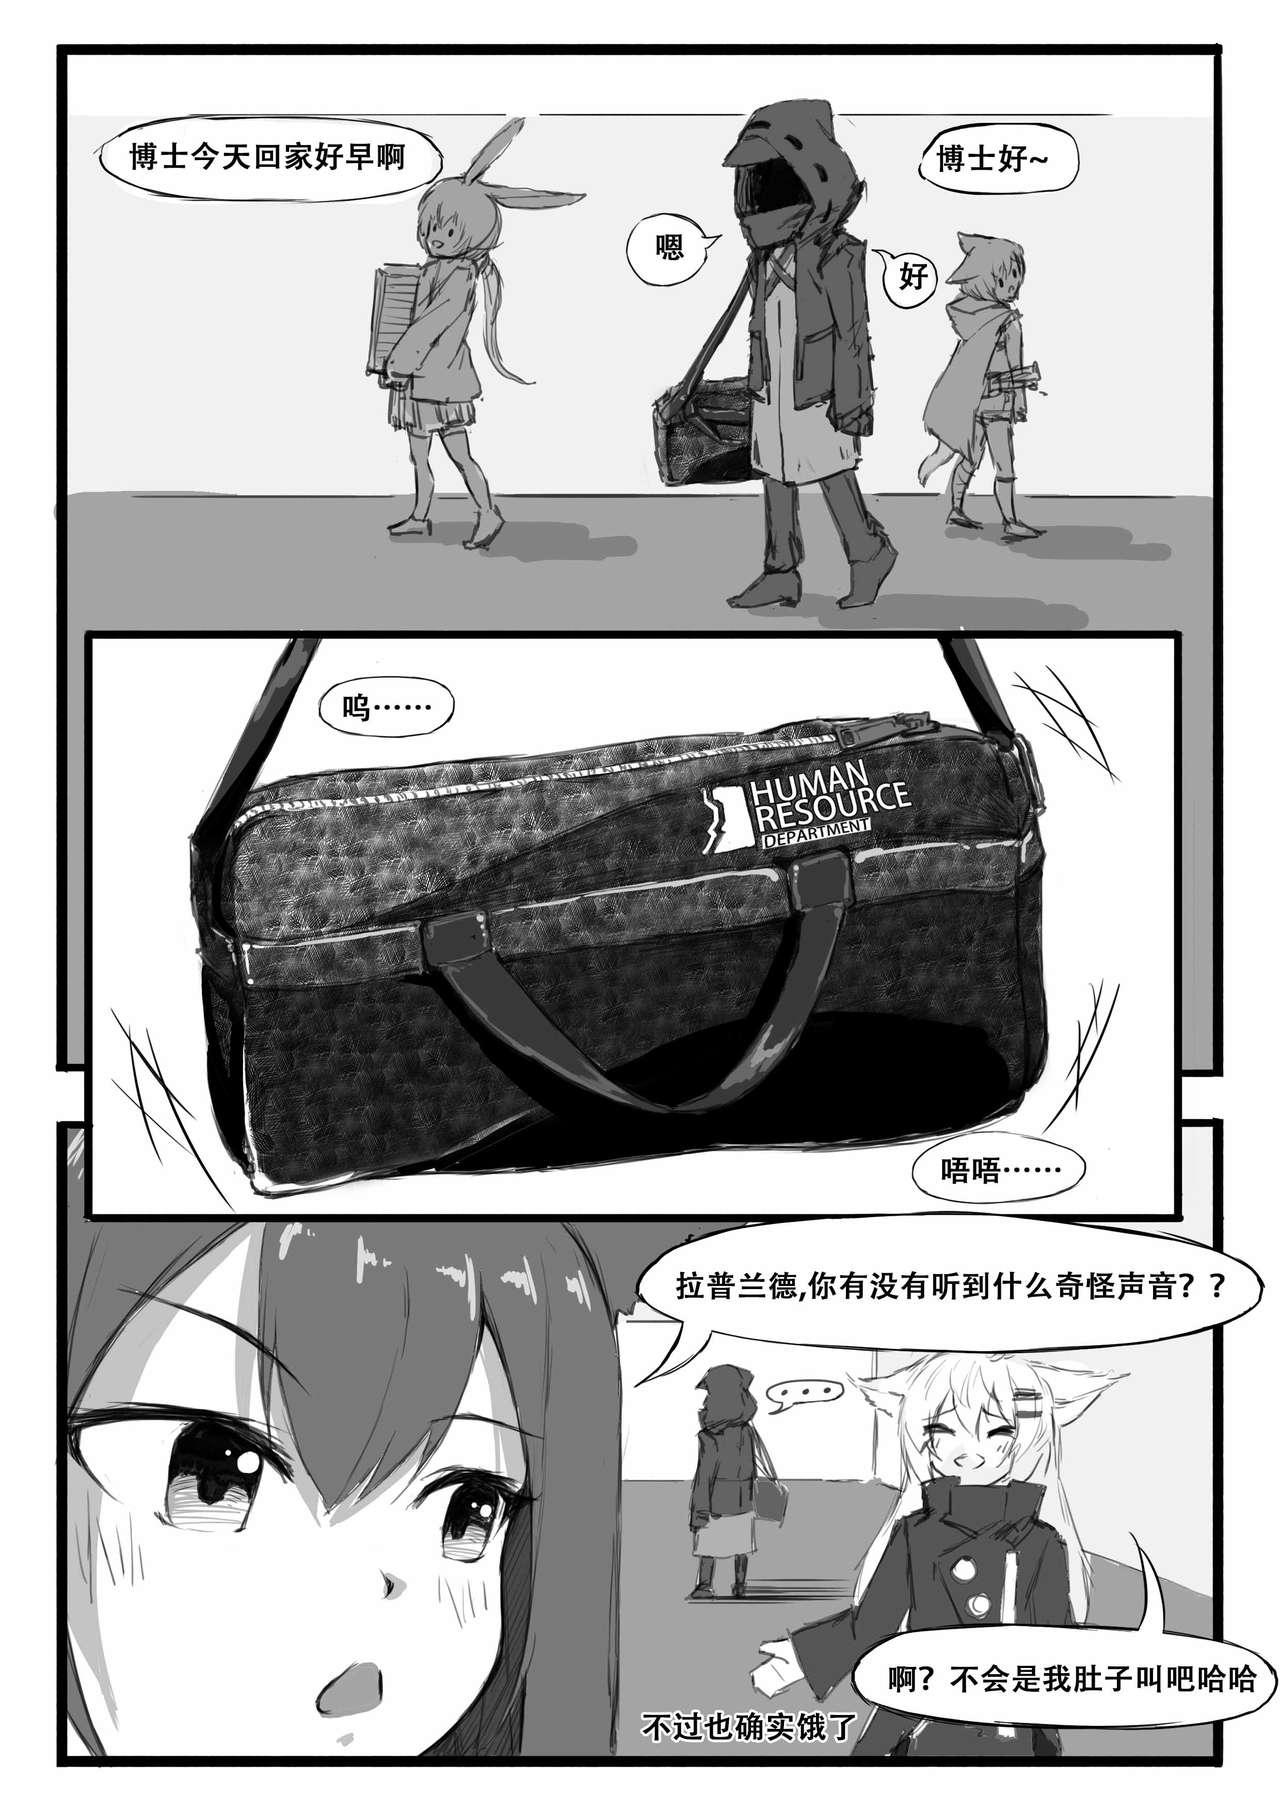 Whores 铃兰的单人任务 - Arknights Piroca - Page 10